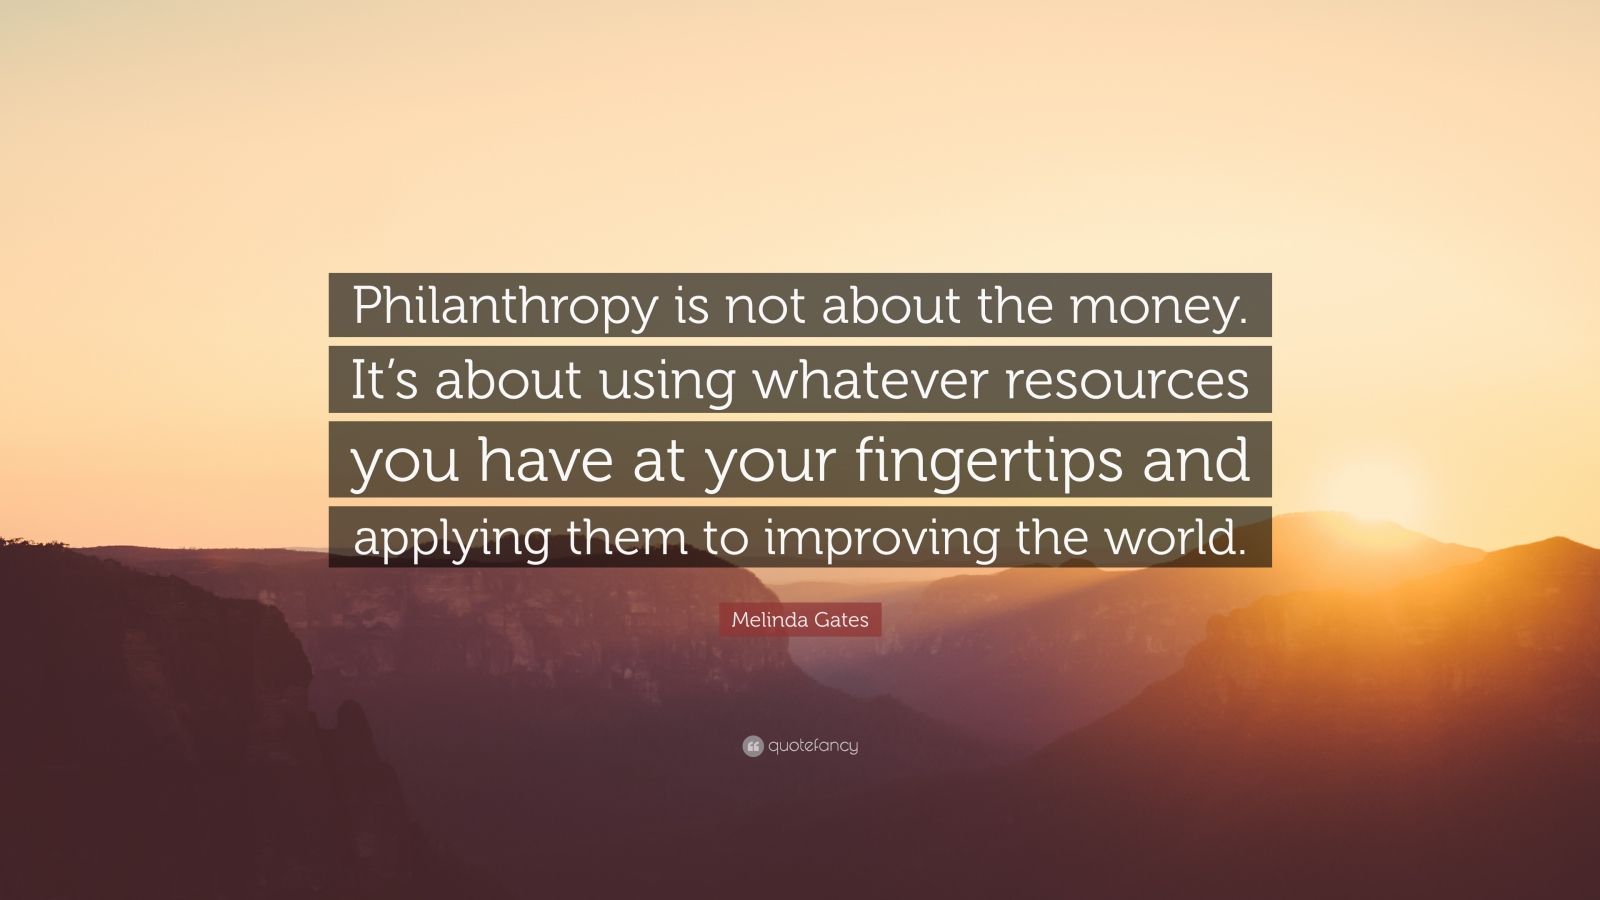 Melinda Gates Quote: “Philanthropy is not about the money. It’s about